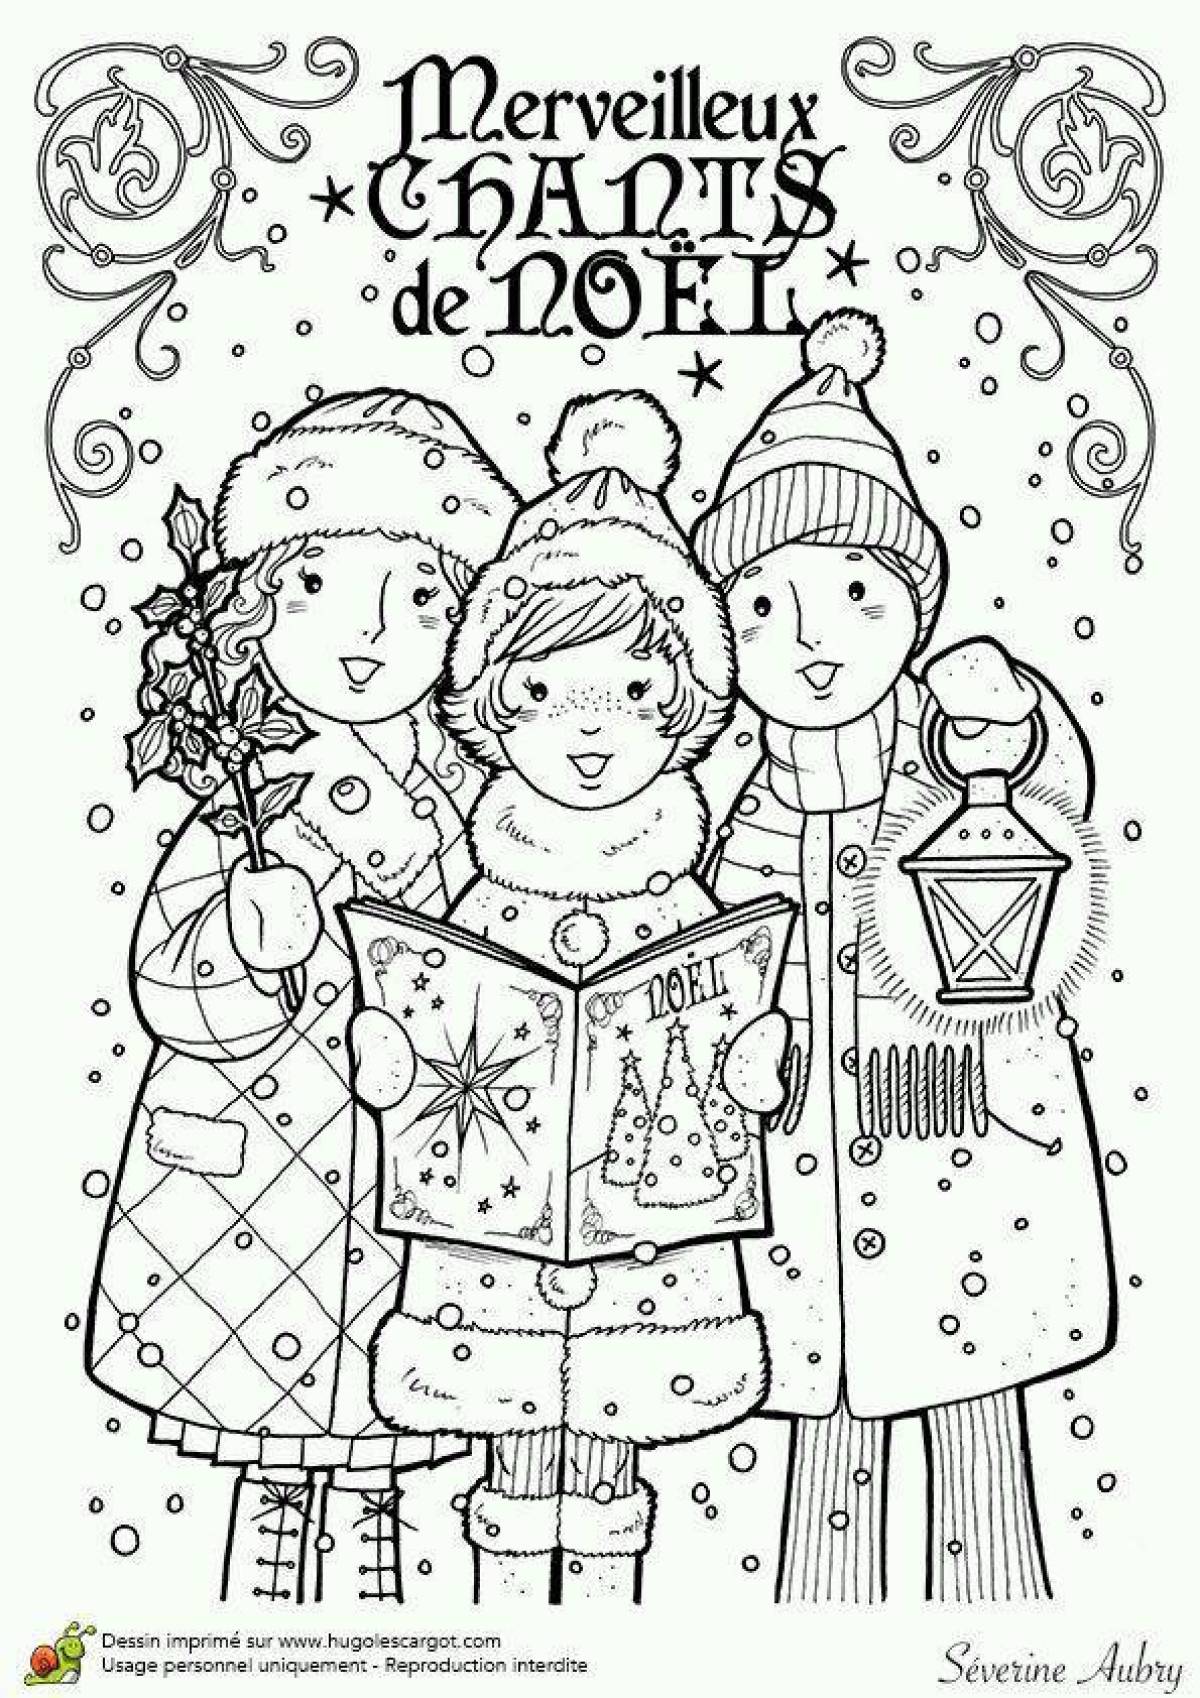 Fun coloring pages of Christmas carols for kids